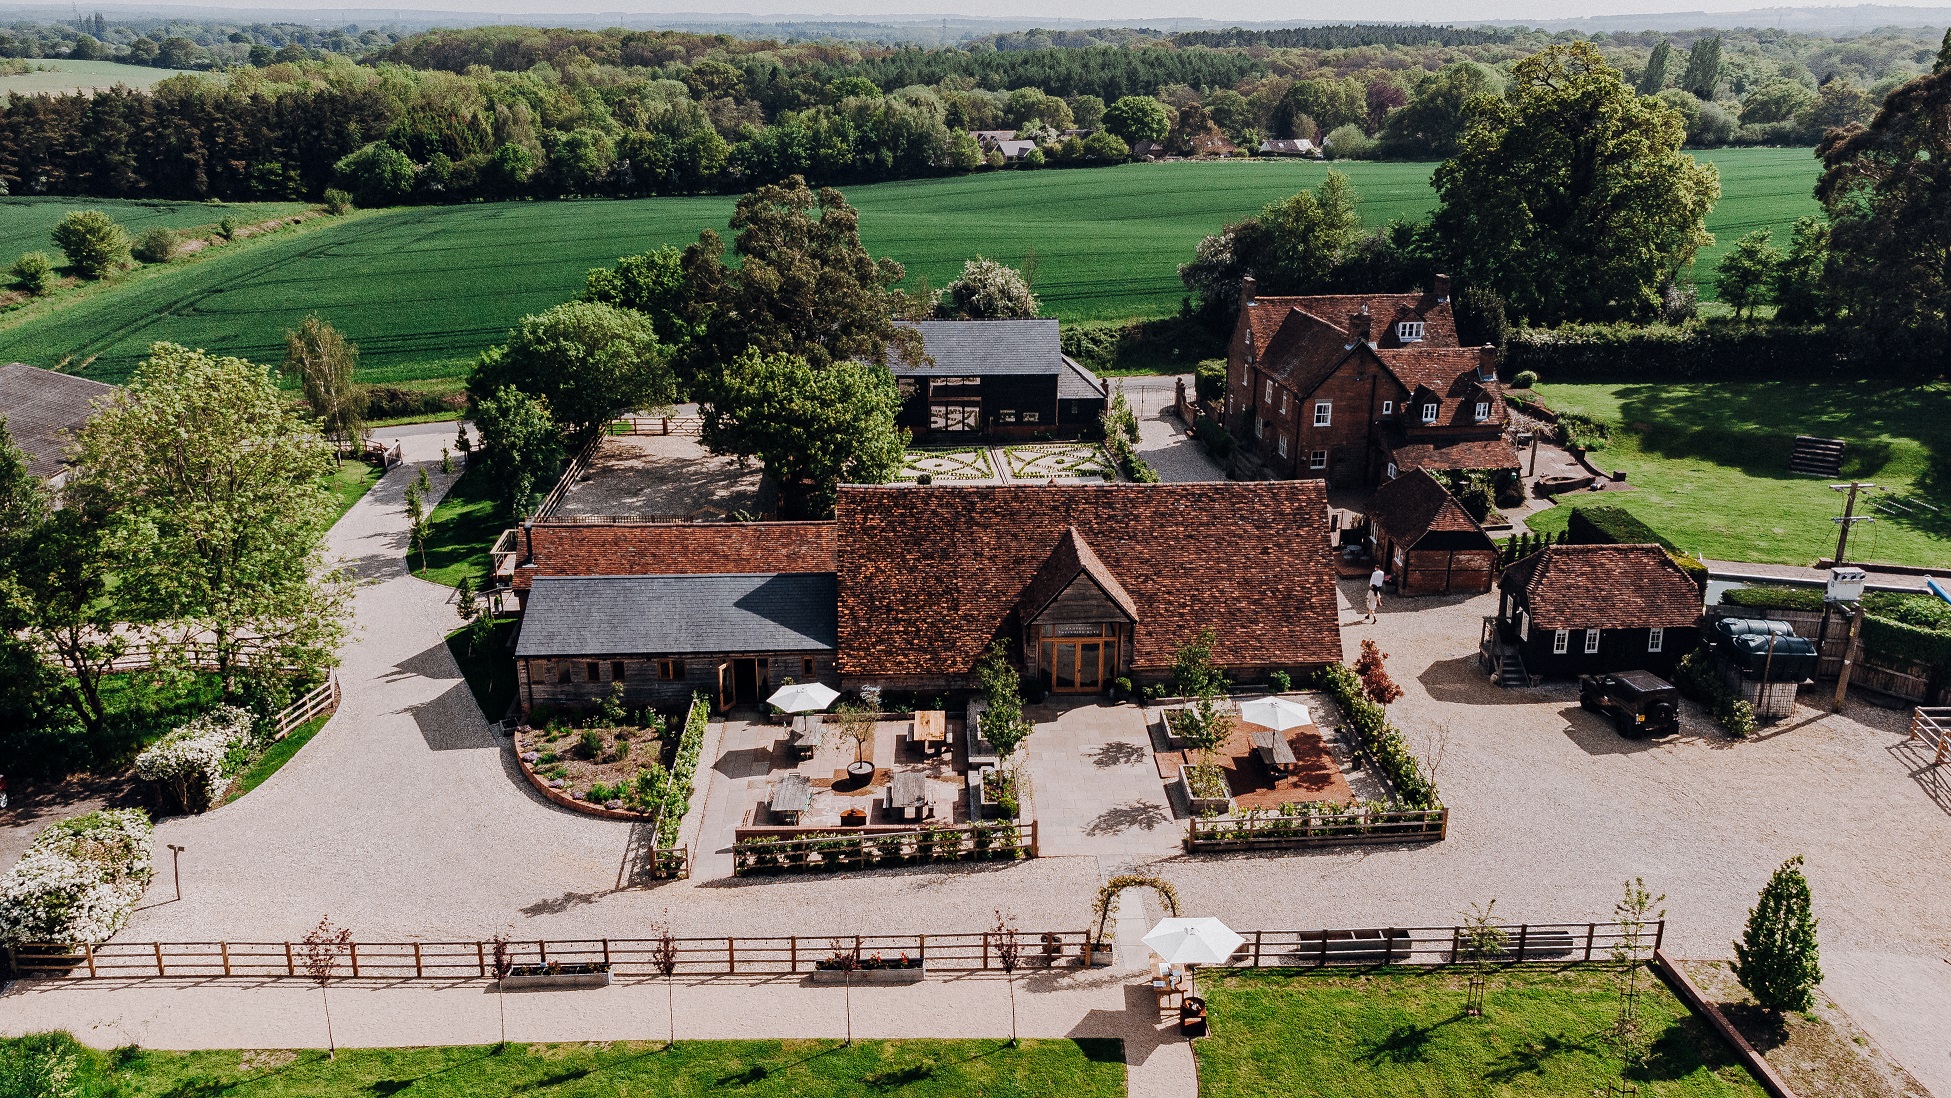 An aerial image of the farm and outbuildings.